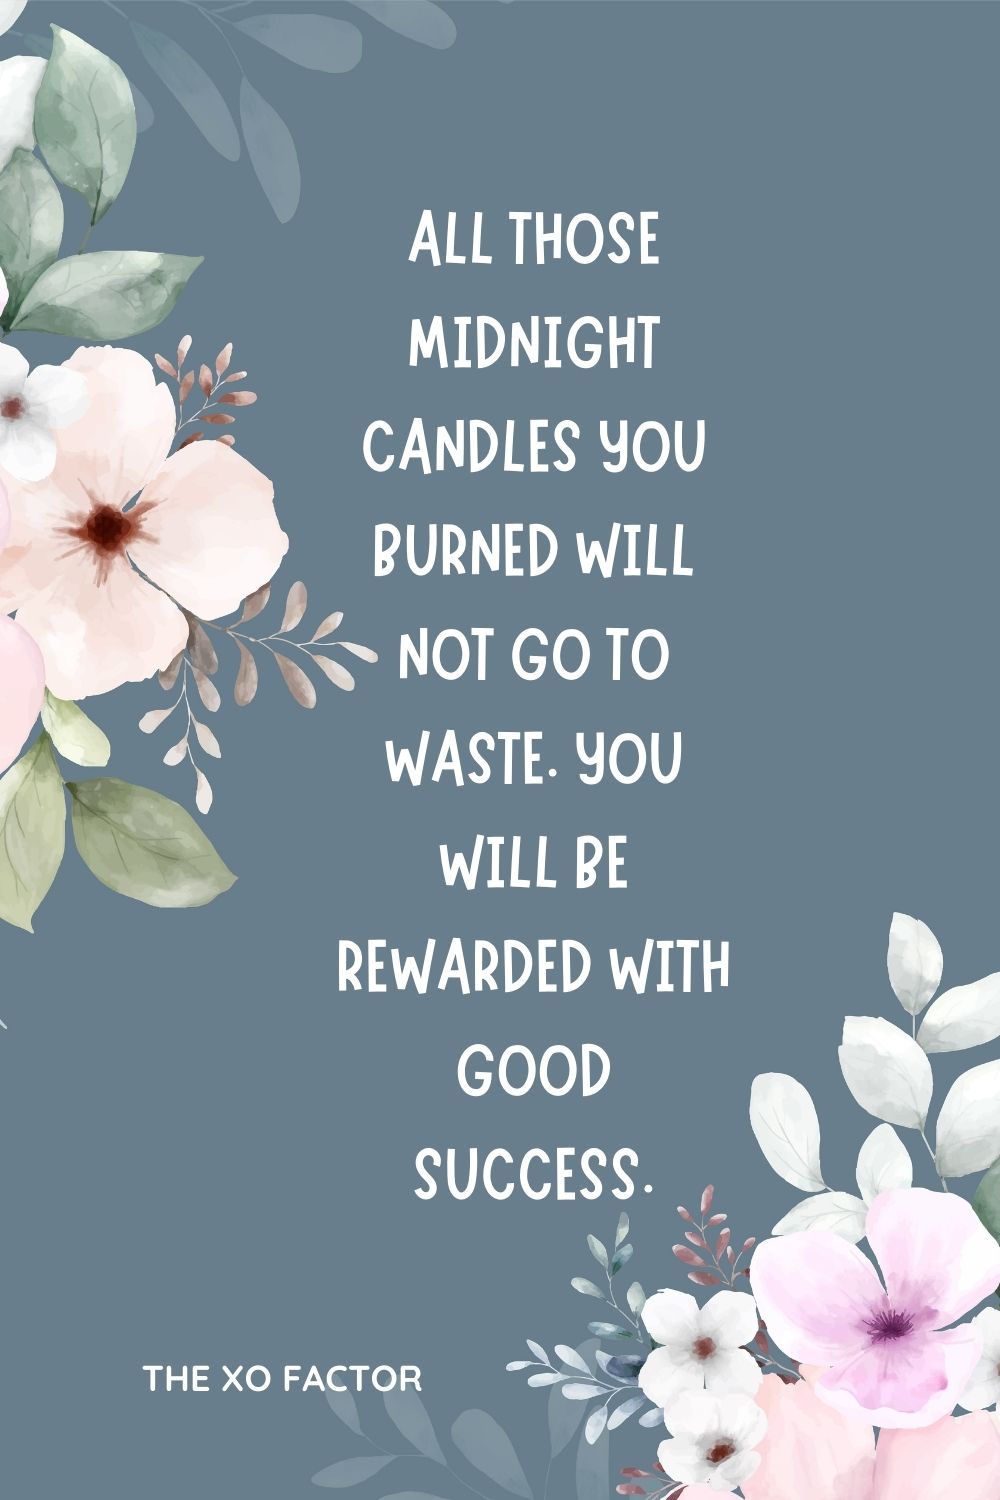 All those midnight candles you burned will not go to waste. You will be rewarded with good success.